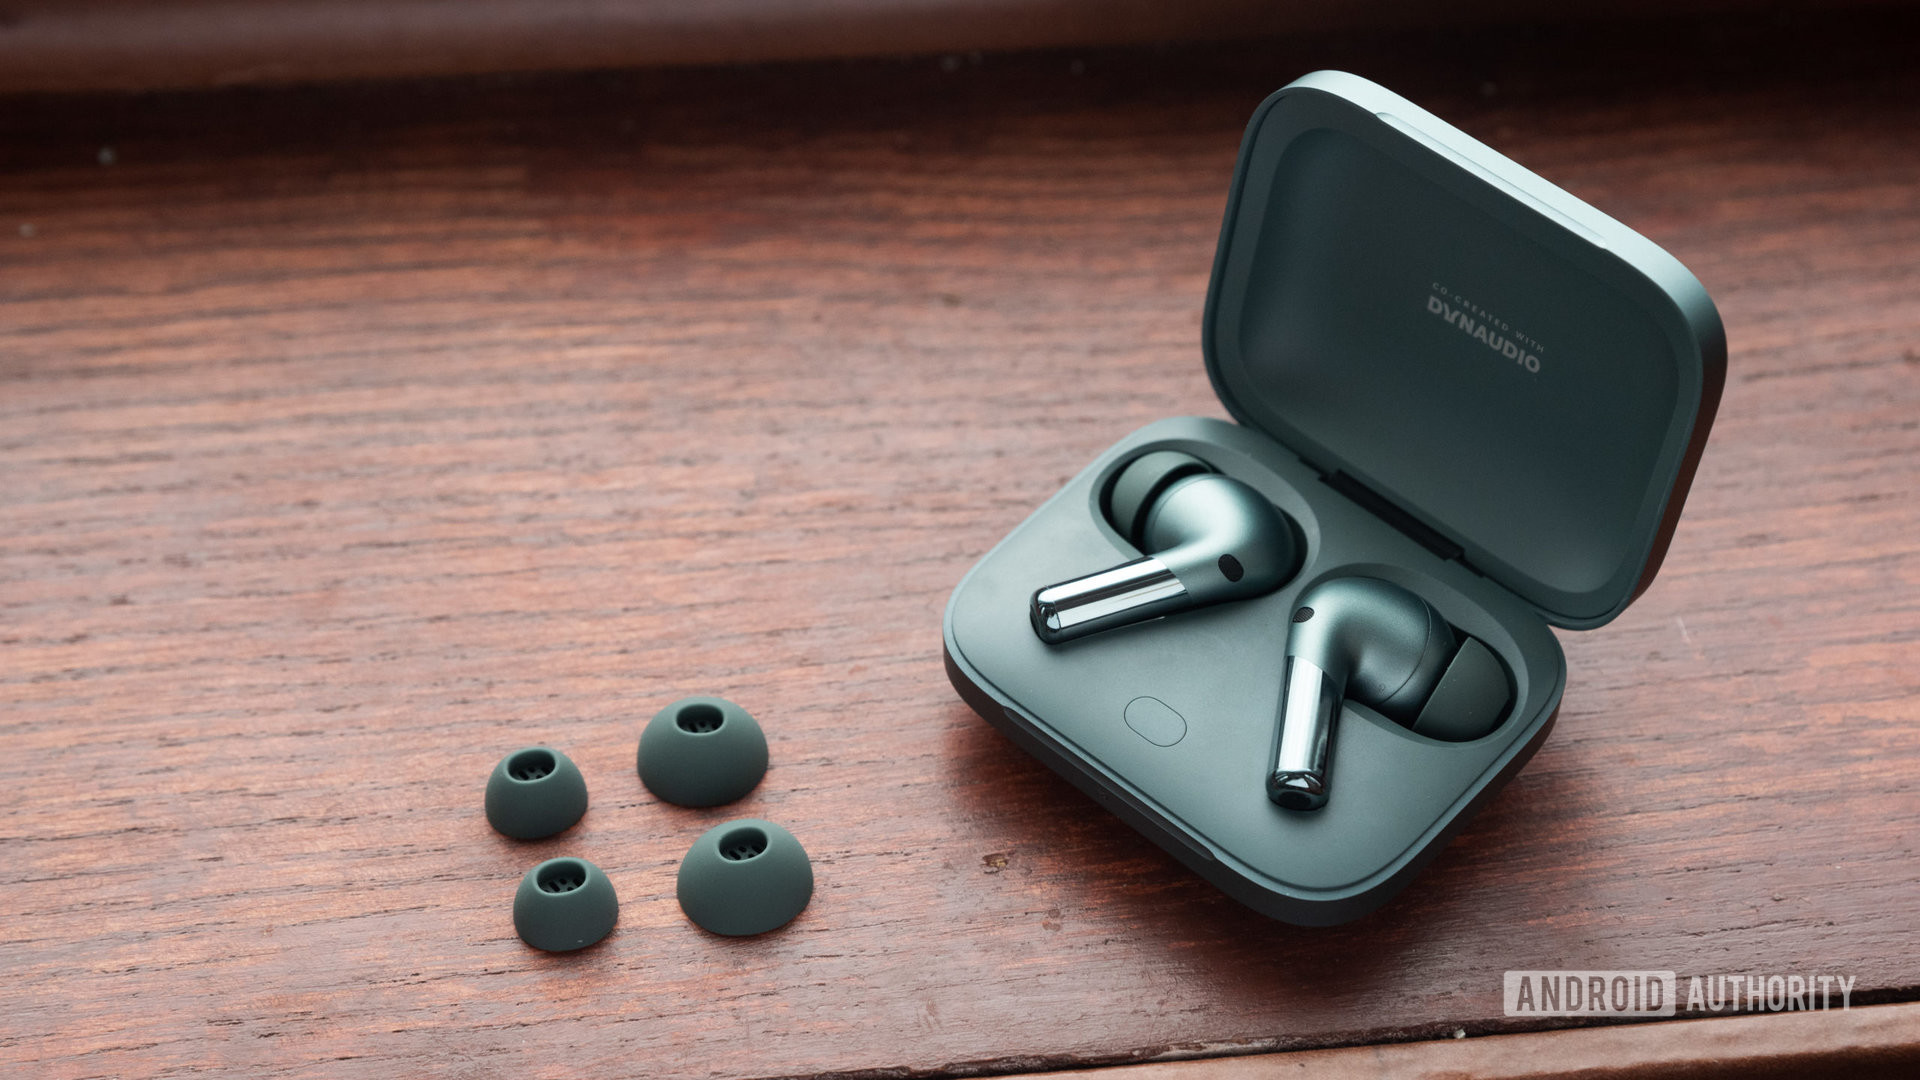 The OnePlus Buds Pro 2 noise cancelling wireless earbuds and ear tips on a wooden surface.